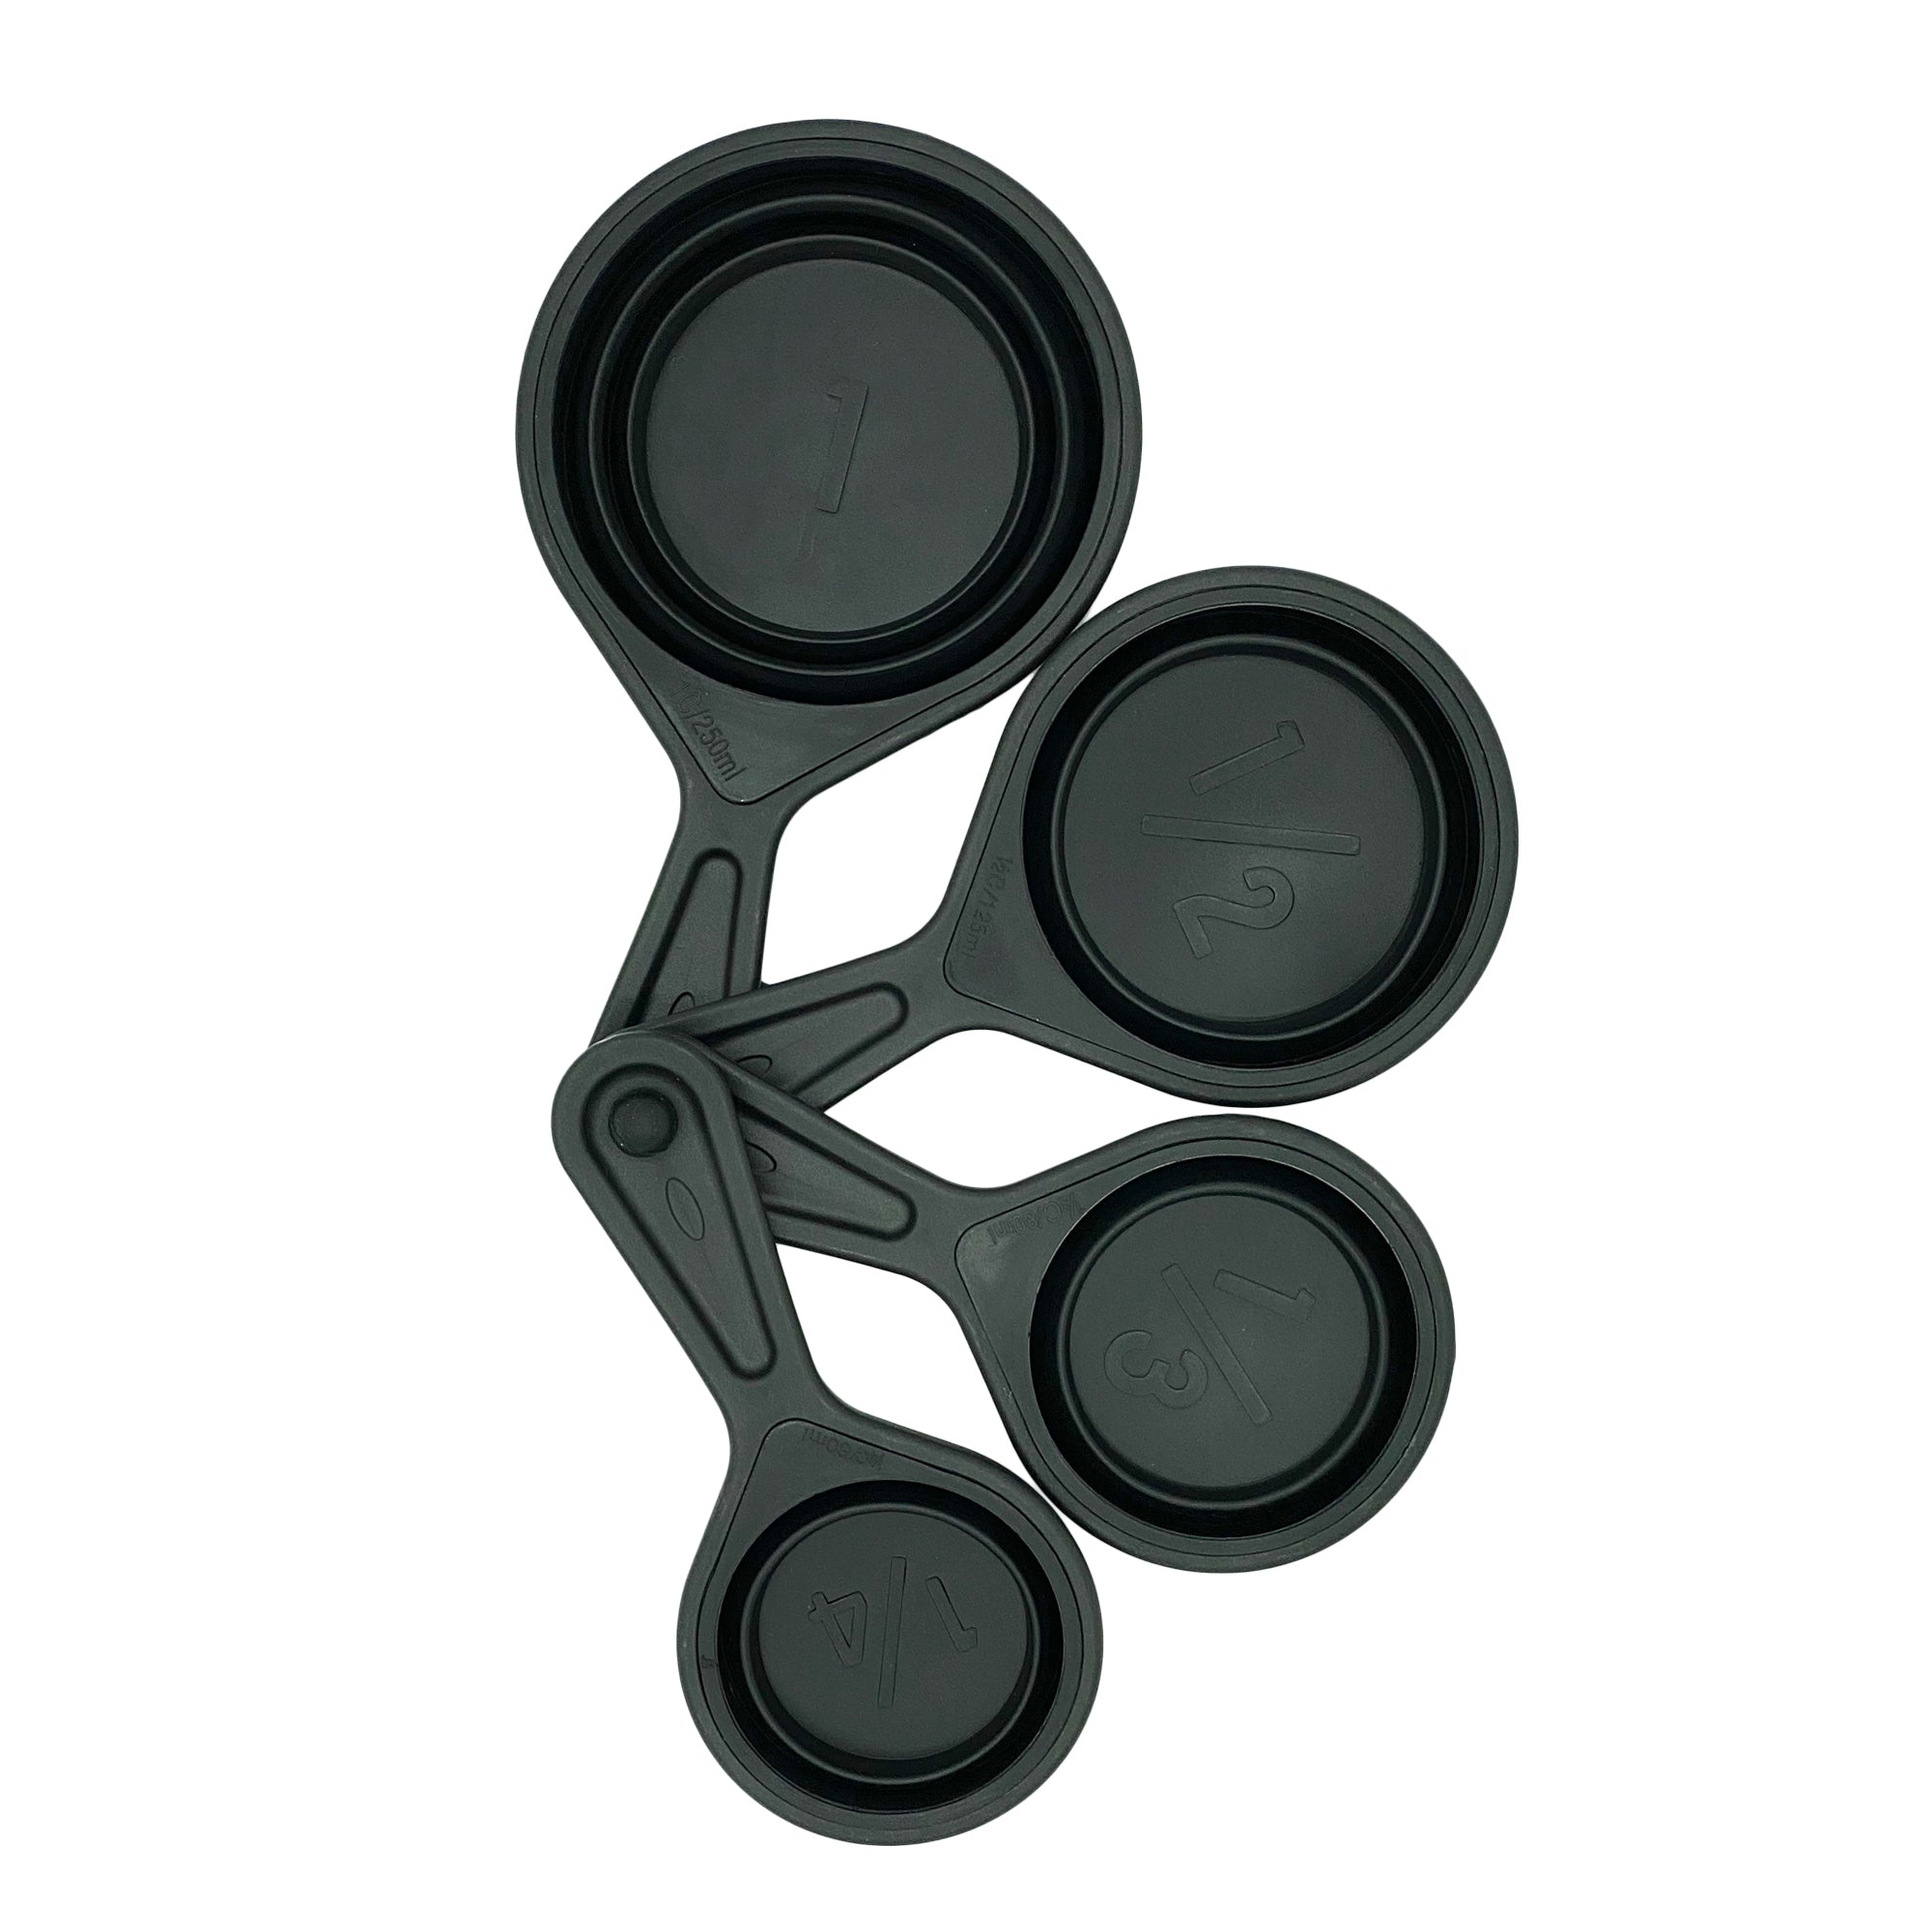 Measuring Cups And Spoons Set, Collapsible Measuring Cups